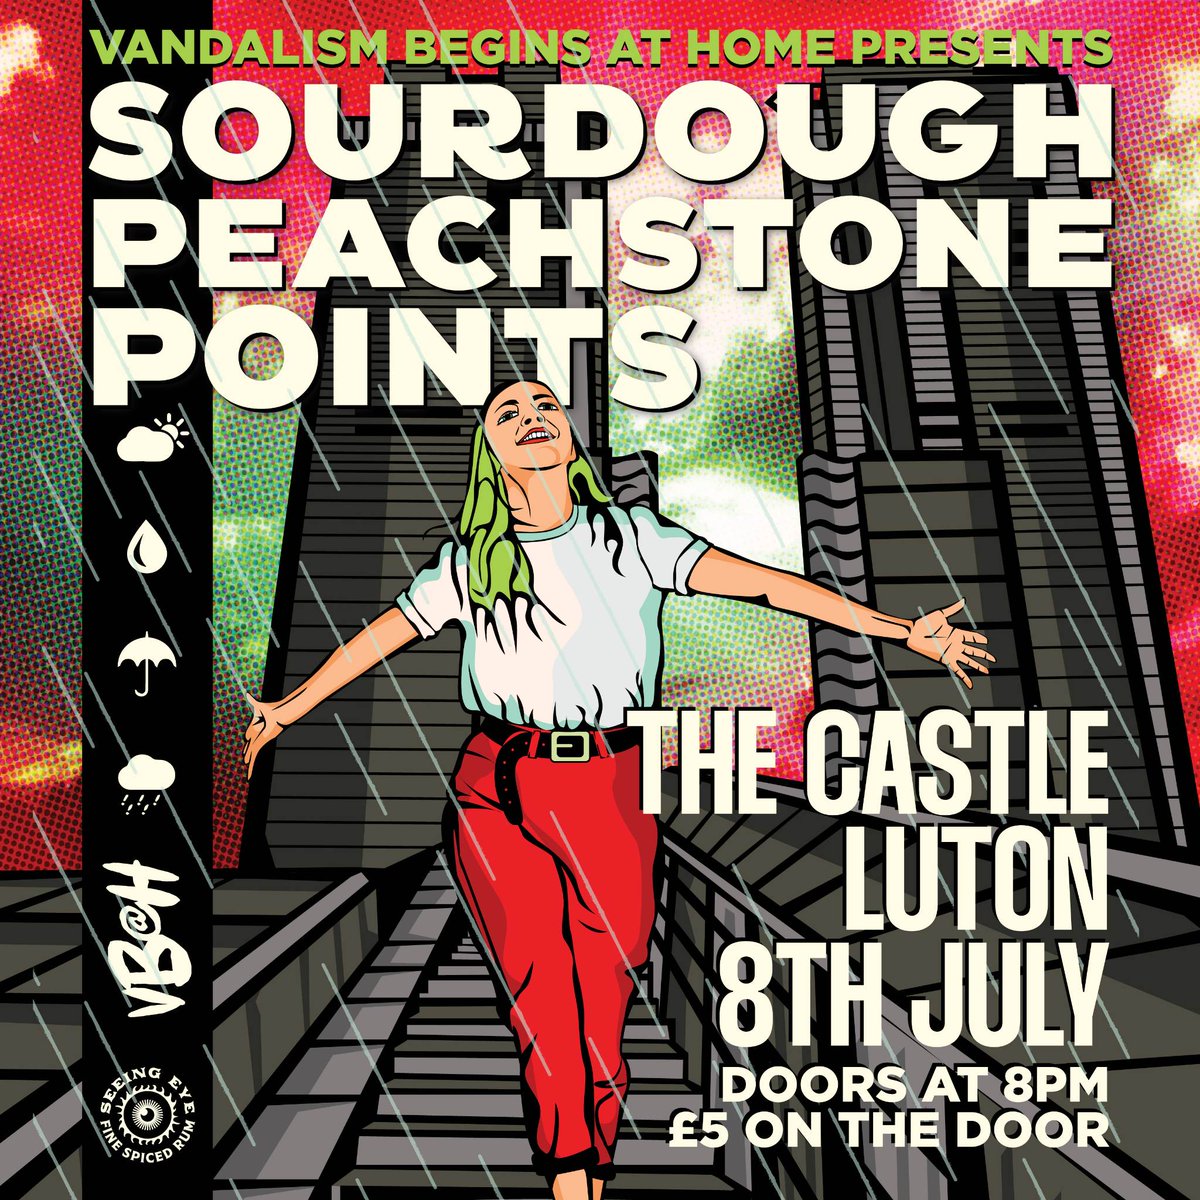 Do you hear that thunder? That's the sound of strength in numbers @BandSourdough @peachstonemusic & #Points storming @TheCastleLive tonight from 8pm One for the history books this! ⚡⚡⚡